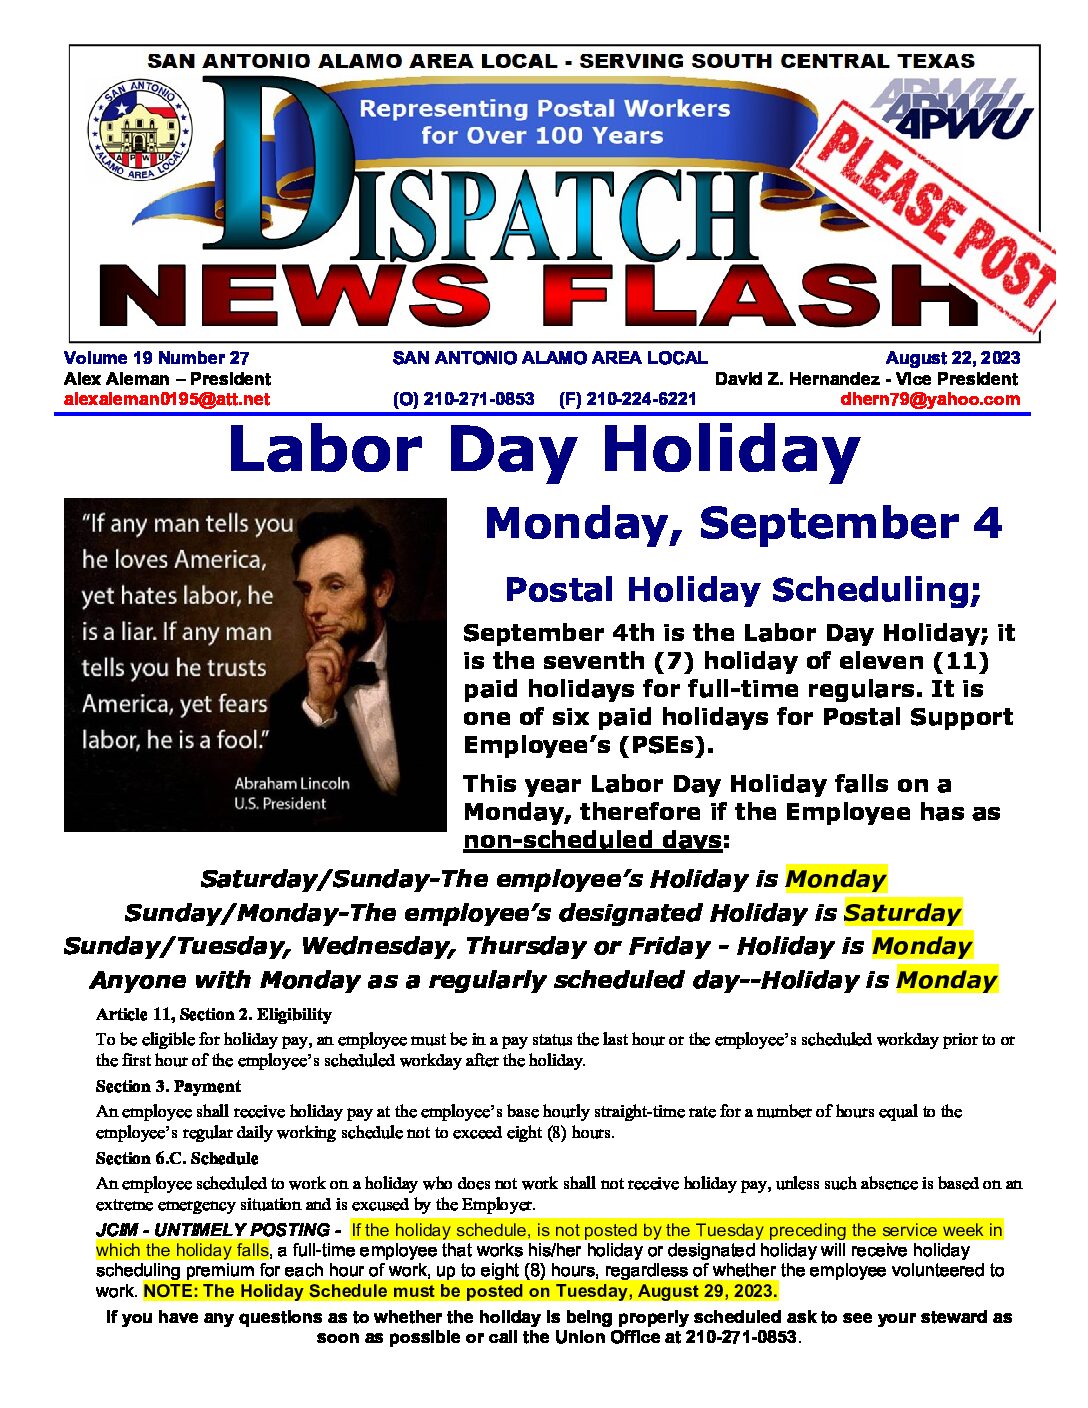 NewsFlash 19-27 Labor Day Holiday Scheduling - 